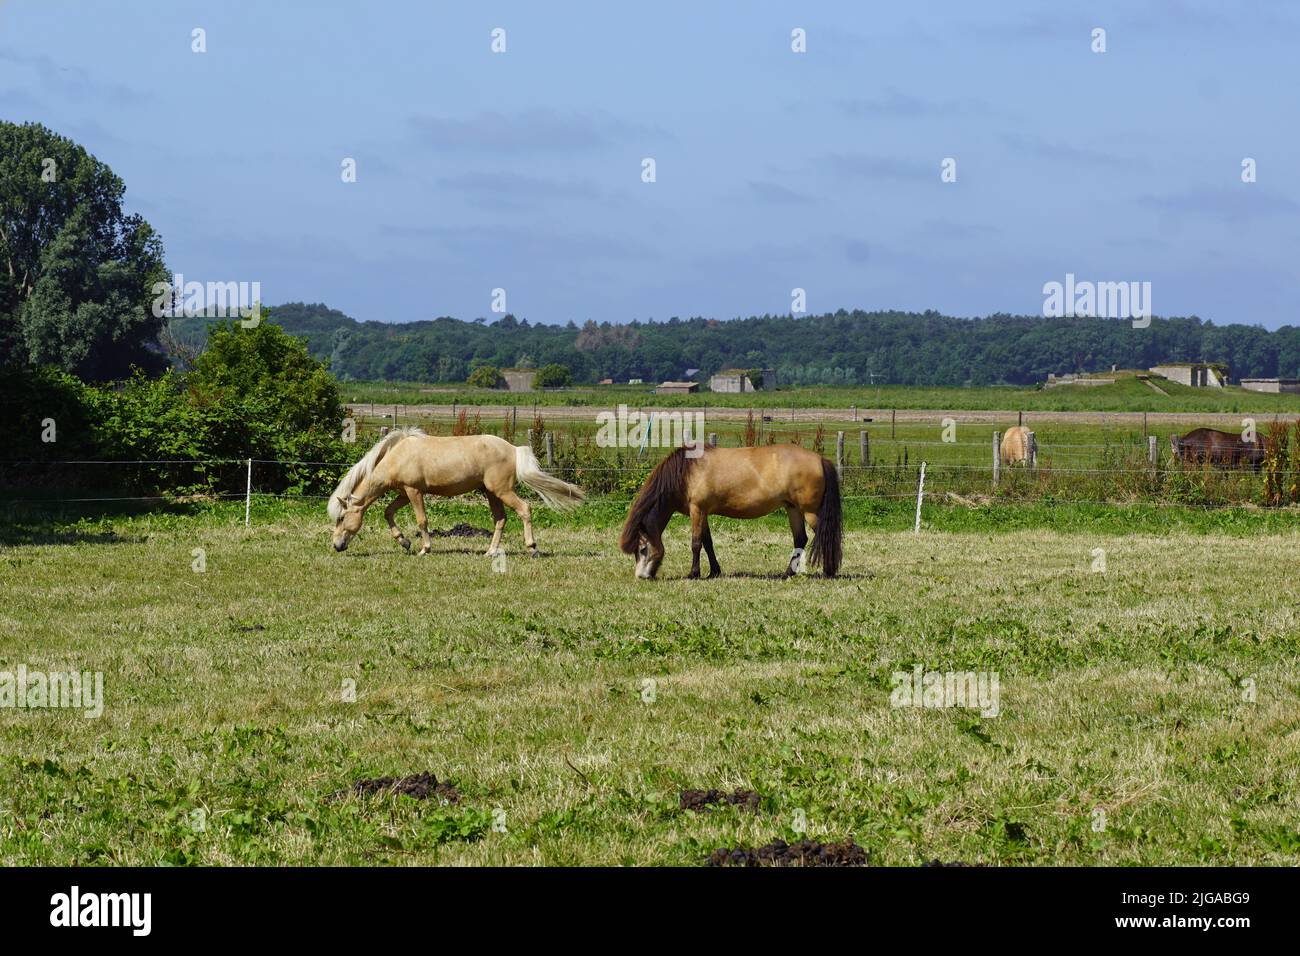 Two horses in a meadow. Dunes in the distance.  In the Netherlands near the village of Bergen. Summer, July. Stock Photo